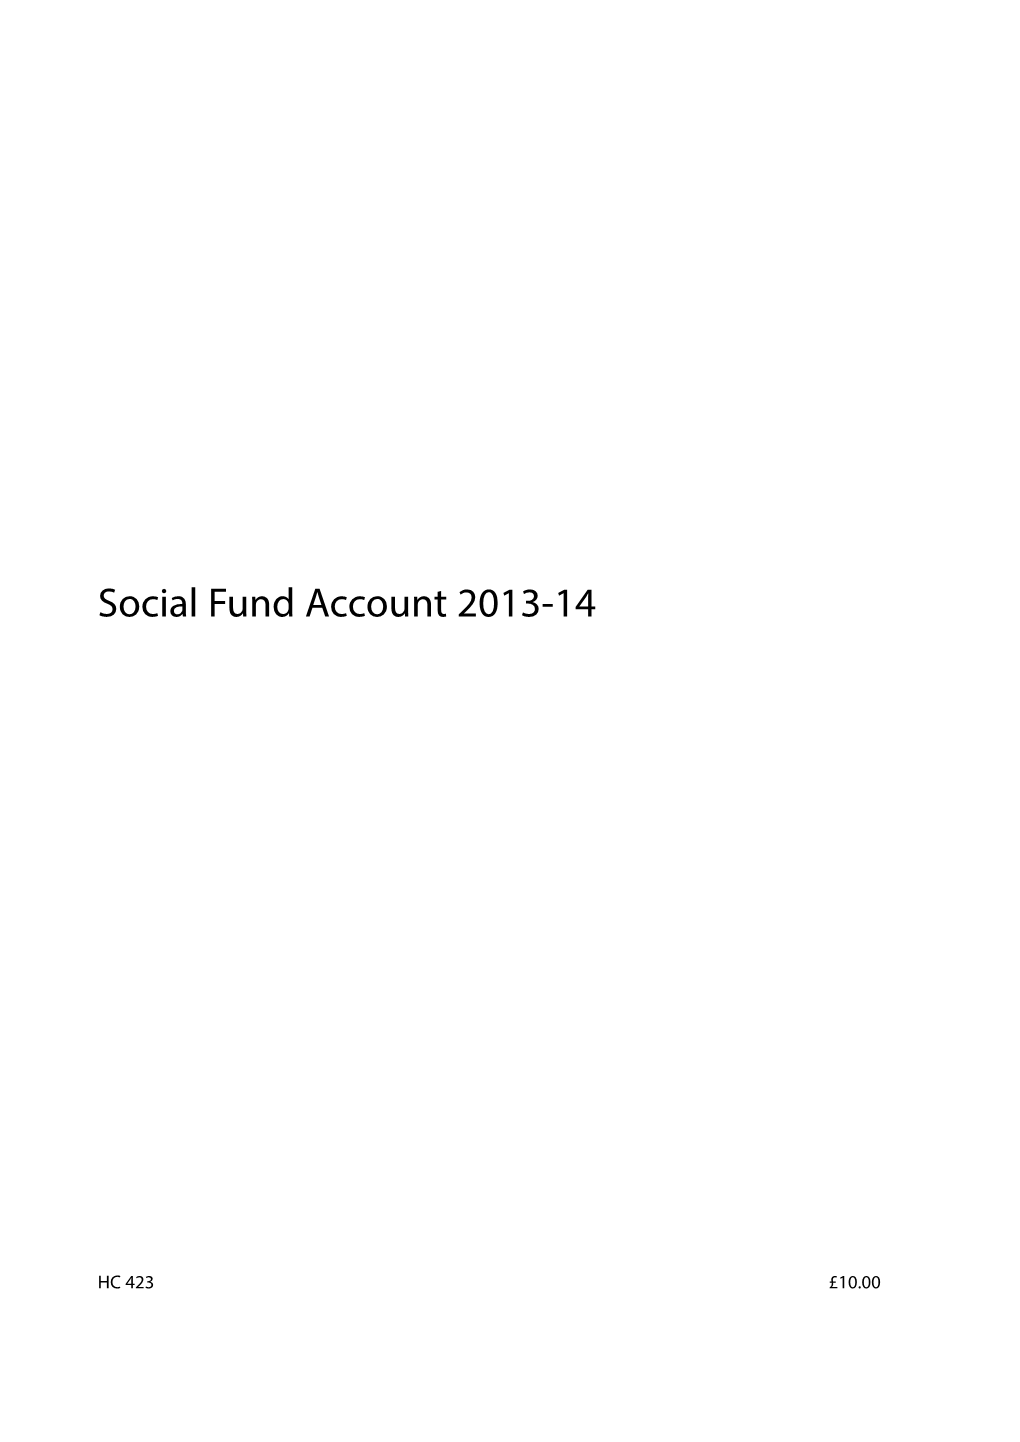 Social Fund White Paper Account 2013-14